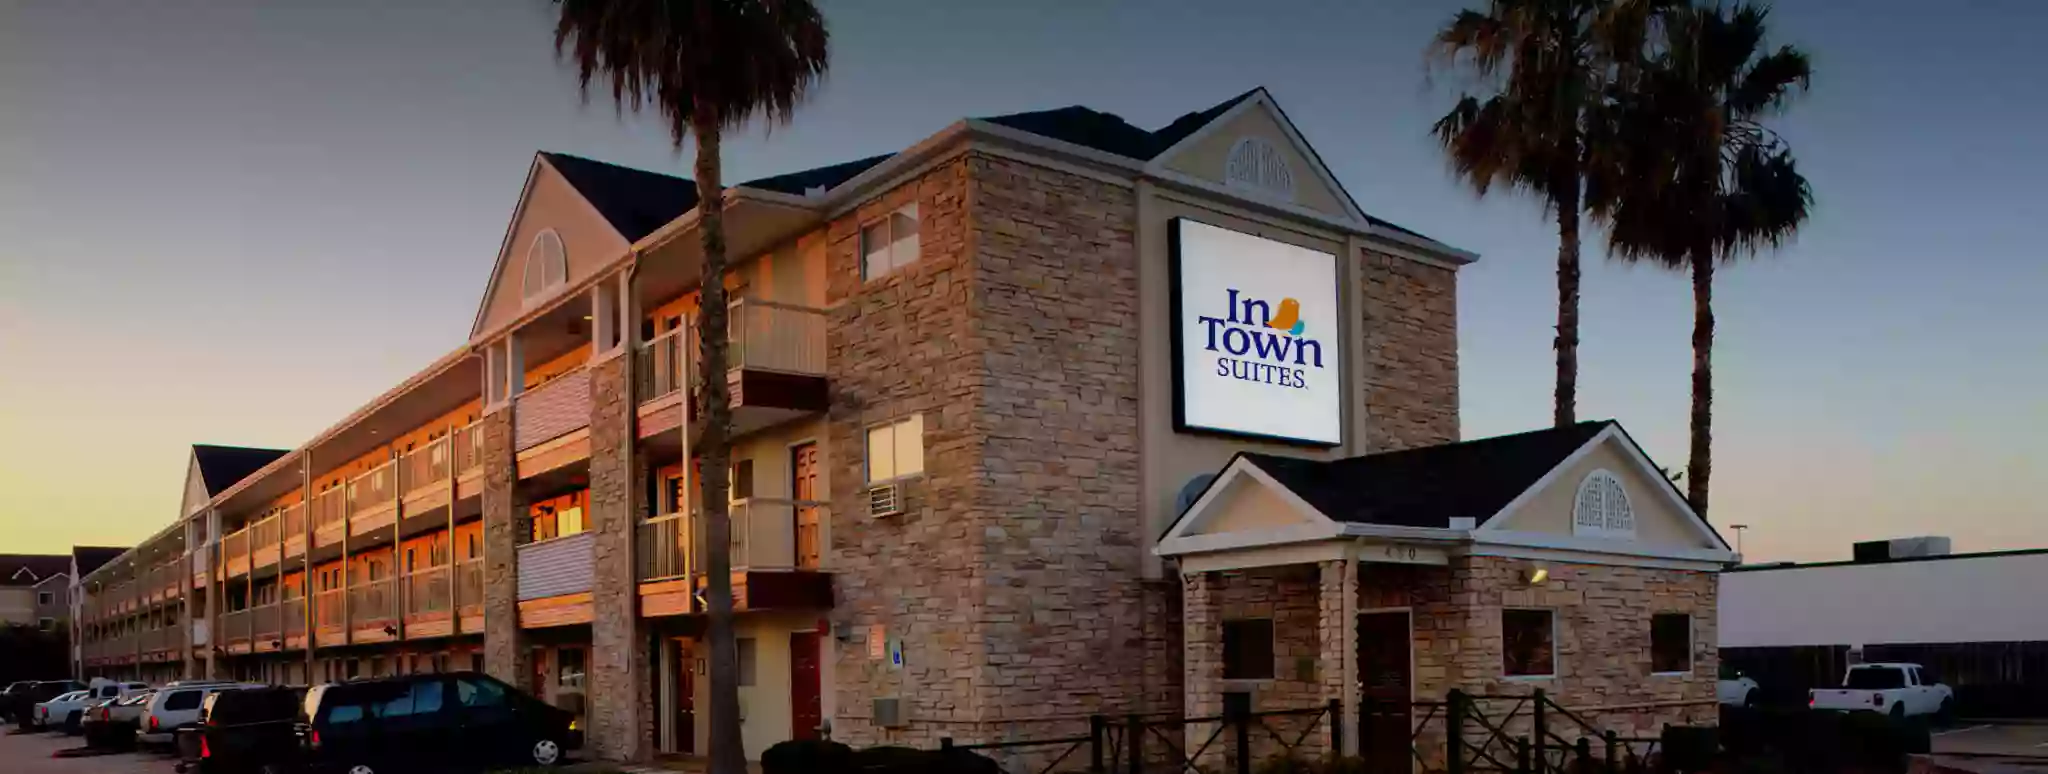 InTown Suites Extended Stay Louisville KY - Wattbourne Lane